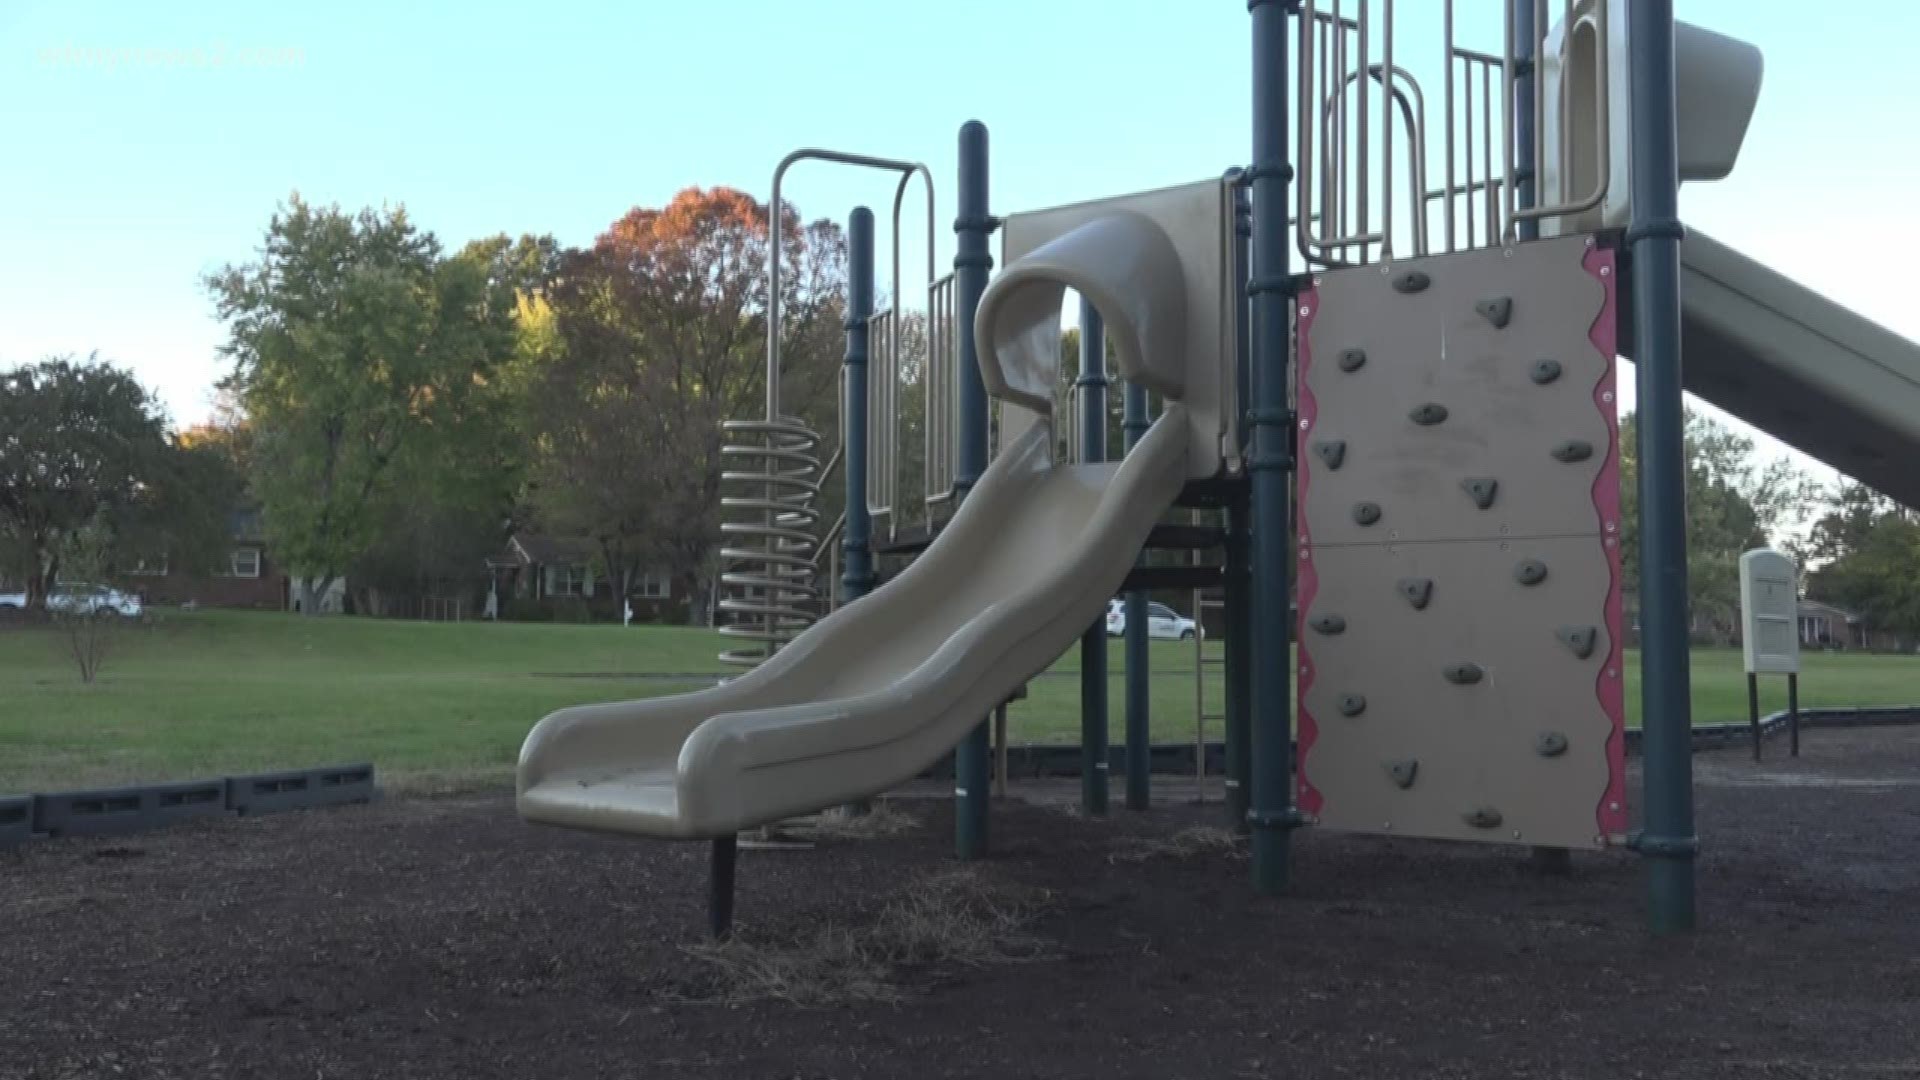 WFMY News 2 spoke with a therapist about having the bullying discussion with kids and what red flags parents need to look out for.